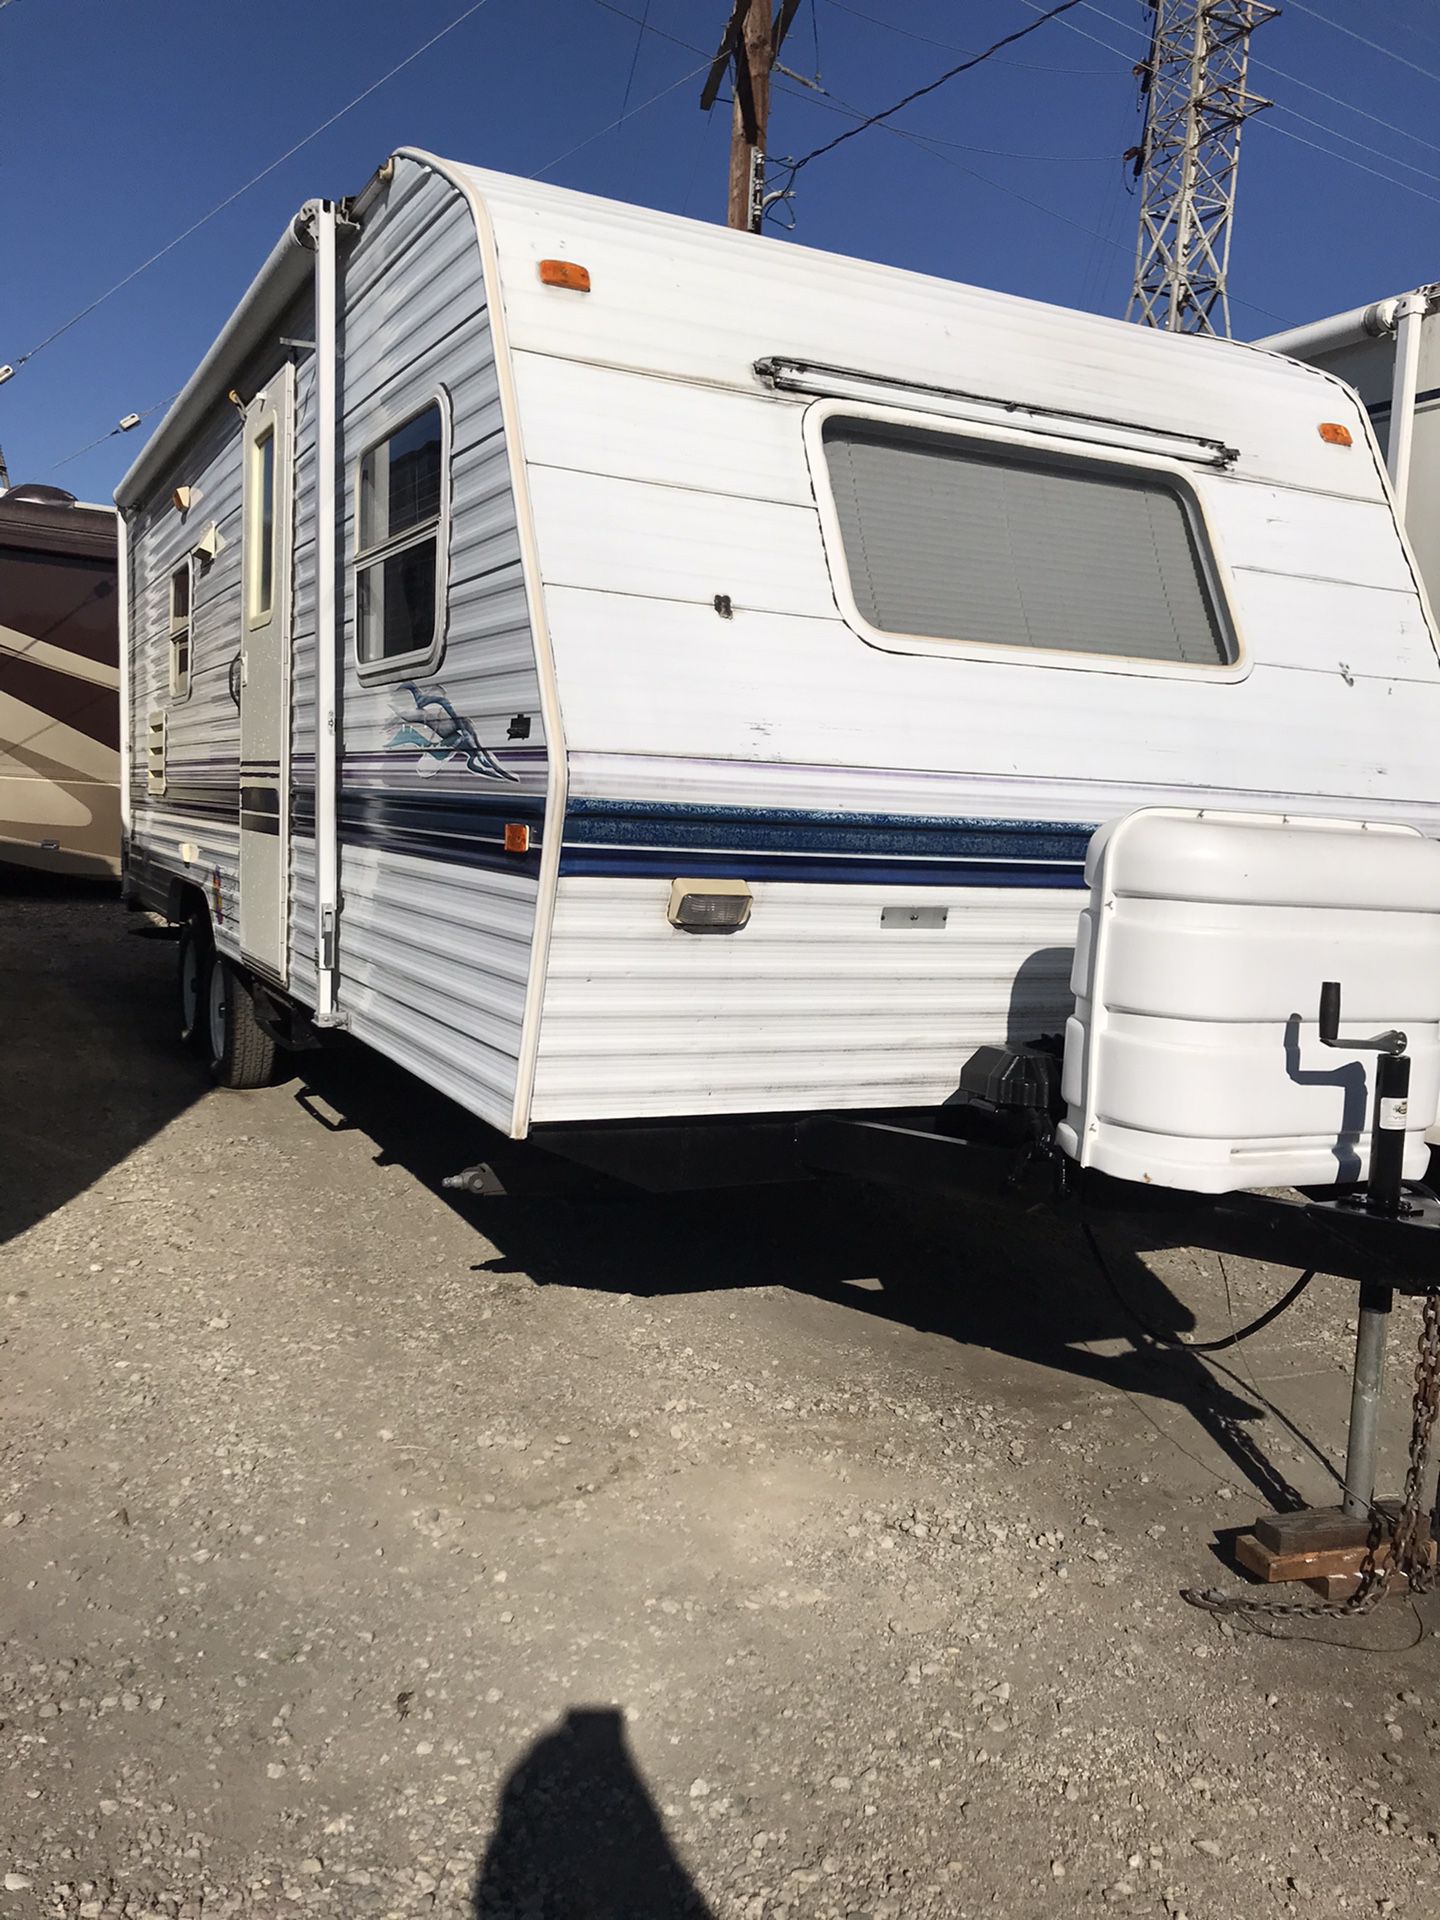 2000 Terry prowler light 21 foot Travel trailer